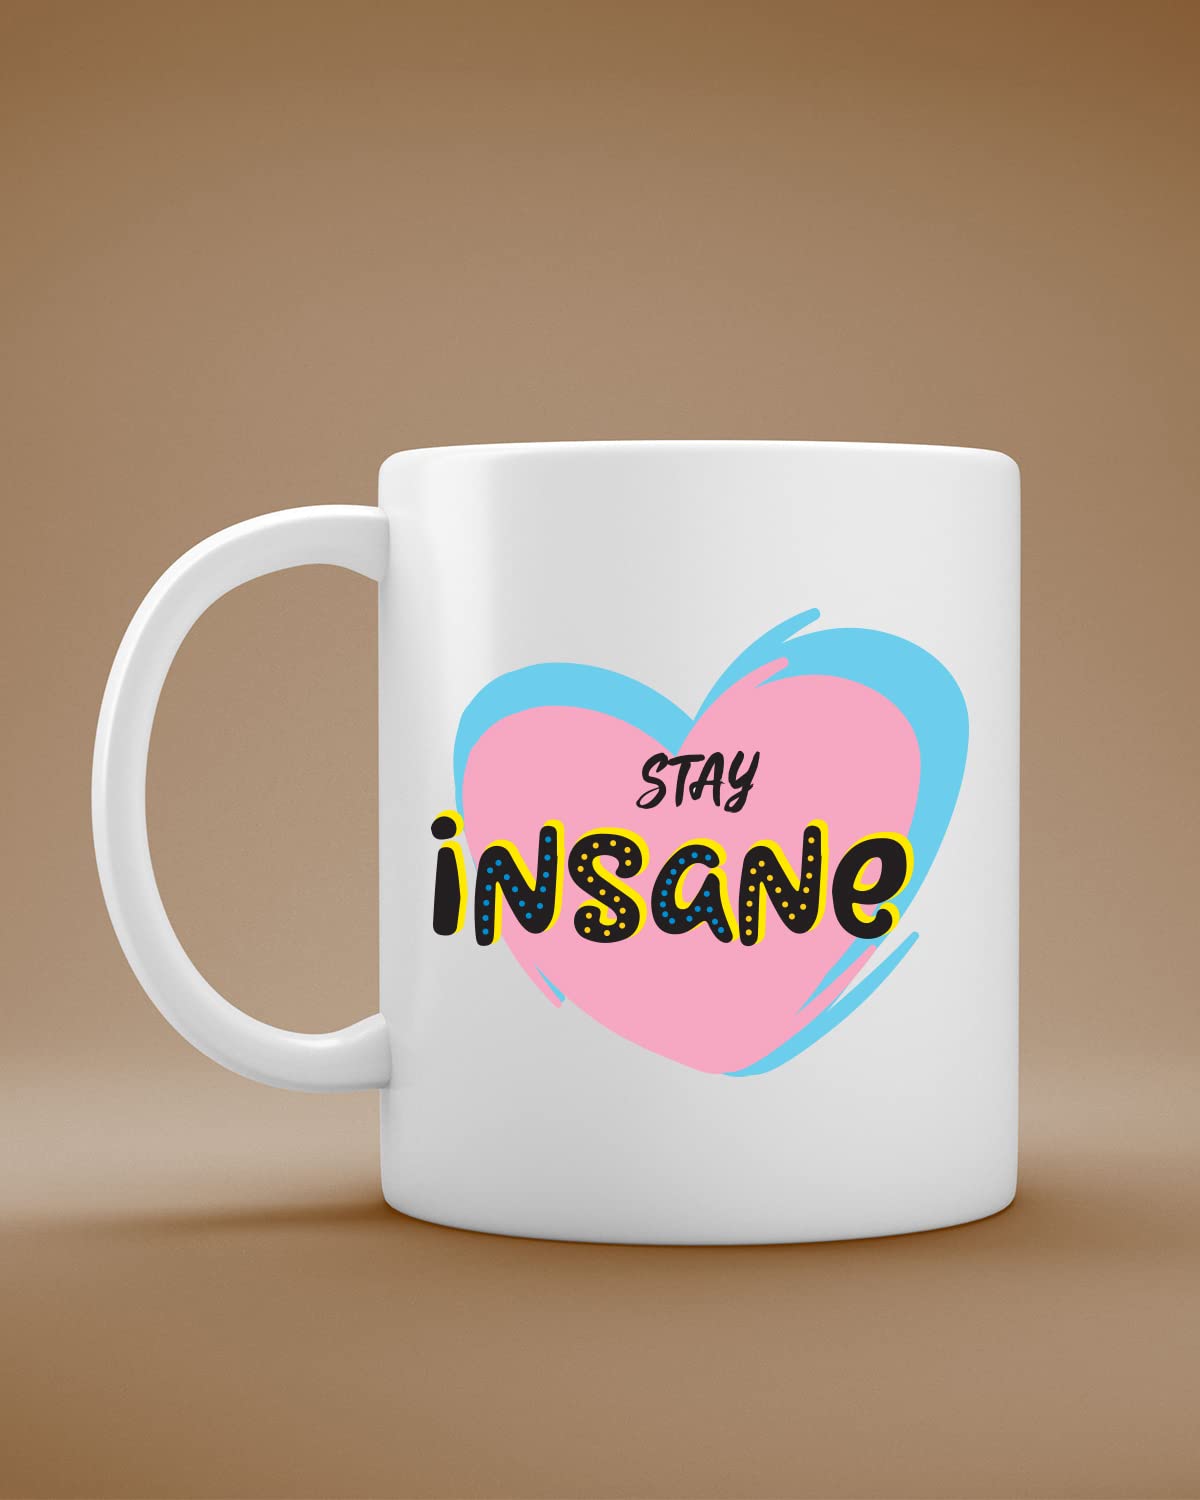 Stay Insane Coffee Mug | Romantic Printed Coffee Mug for Birthday,Anniversary Gift,Valentine's Day Gift, for Someone Special Inspirational thoughts | inspiring gifts for boyfriend | Printed coffee mug(Ceramic) | coffee mug gift for husband